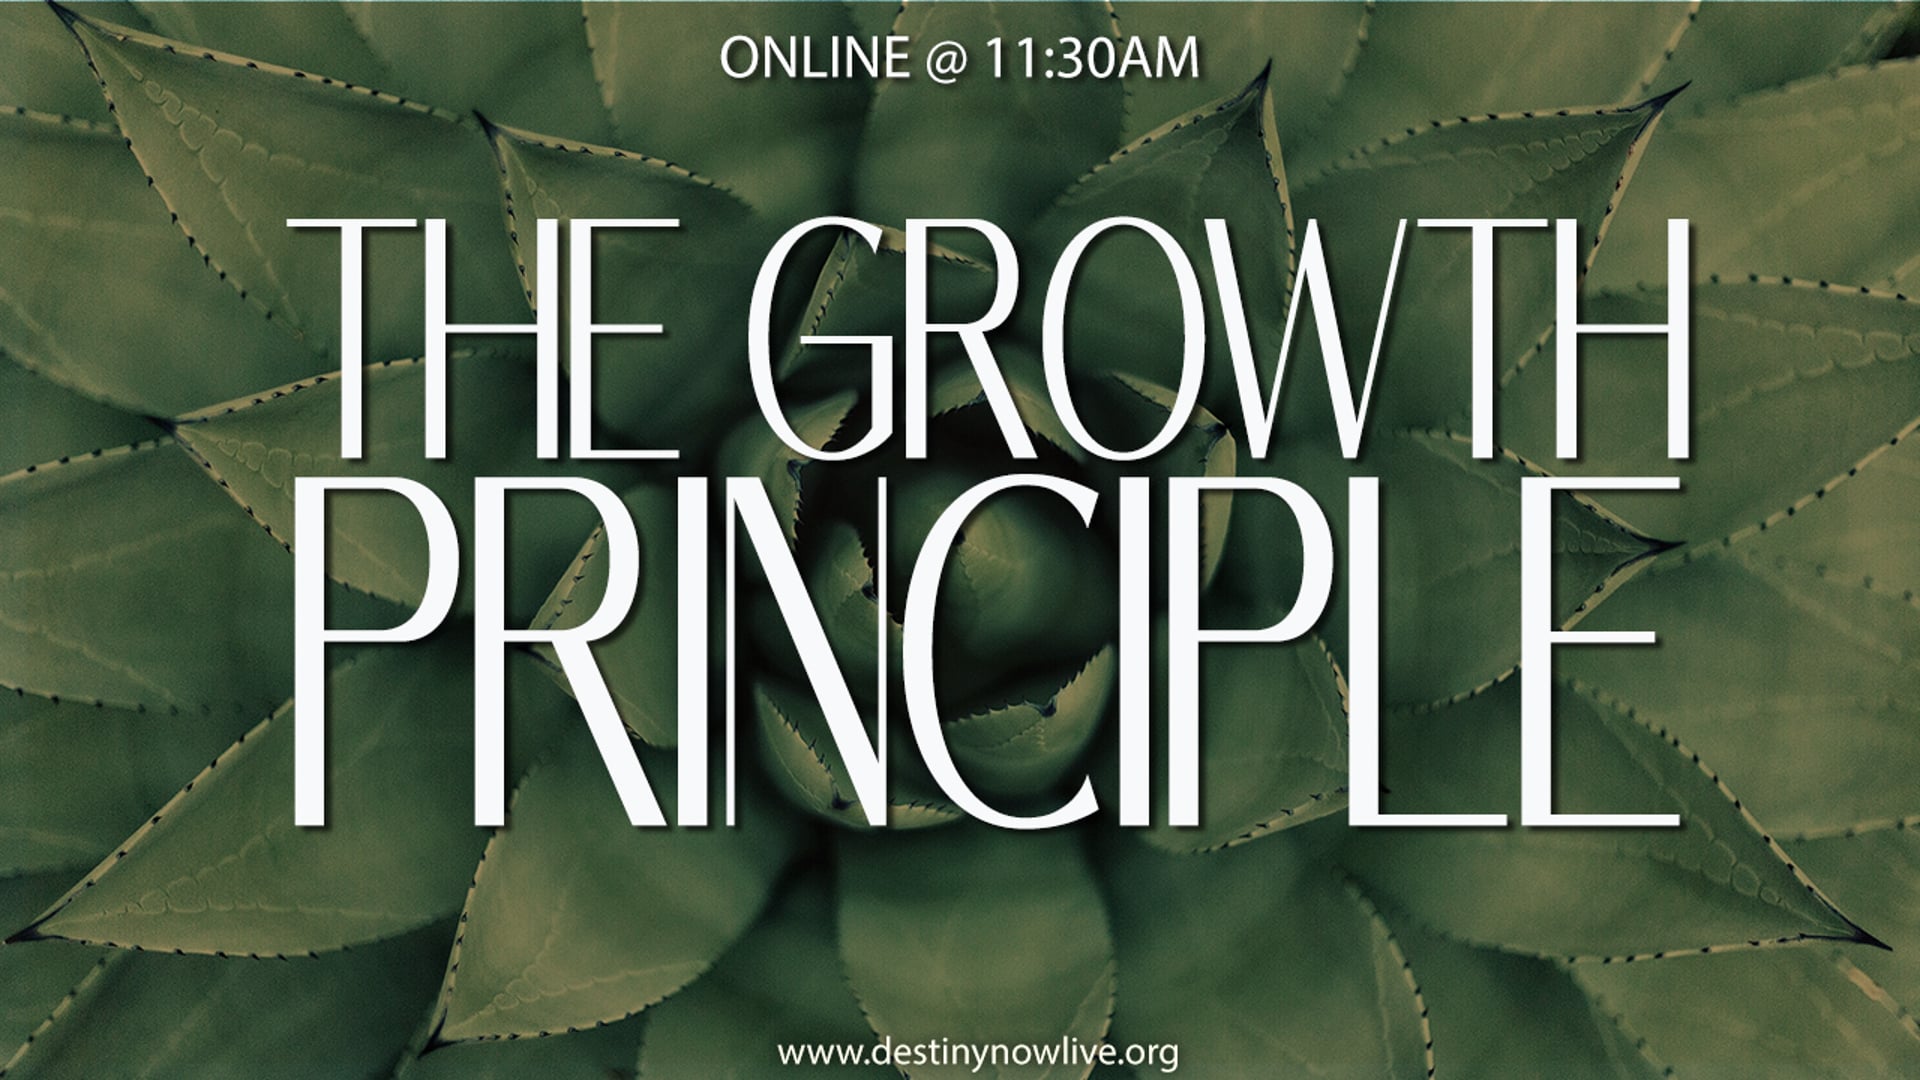 "The Growth Principle" - Online Giving: Text to Give - 910-460-3377 - Give Online @ www.destinynow.org